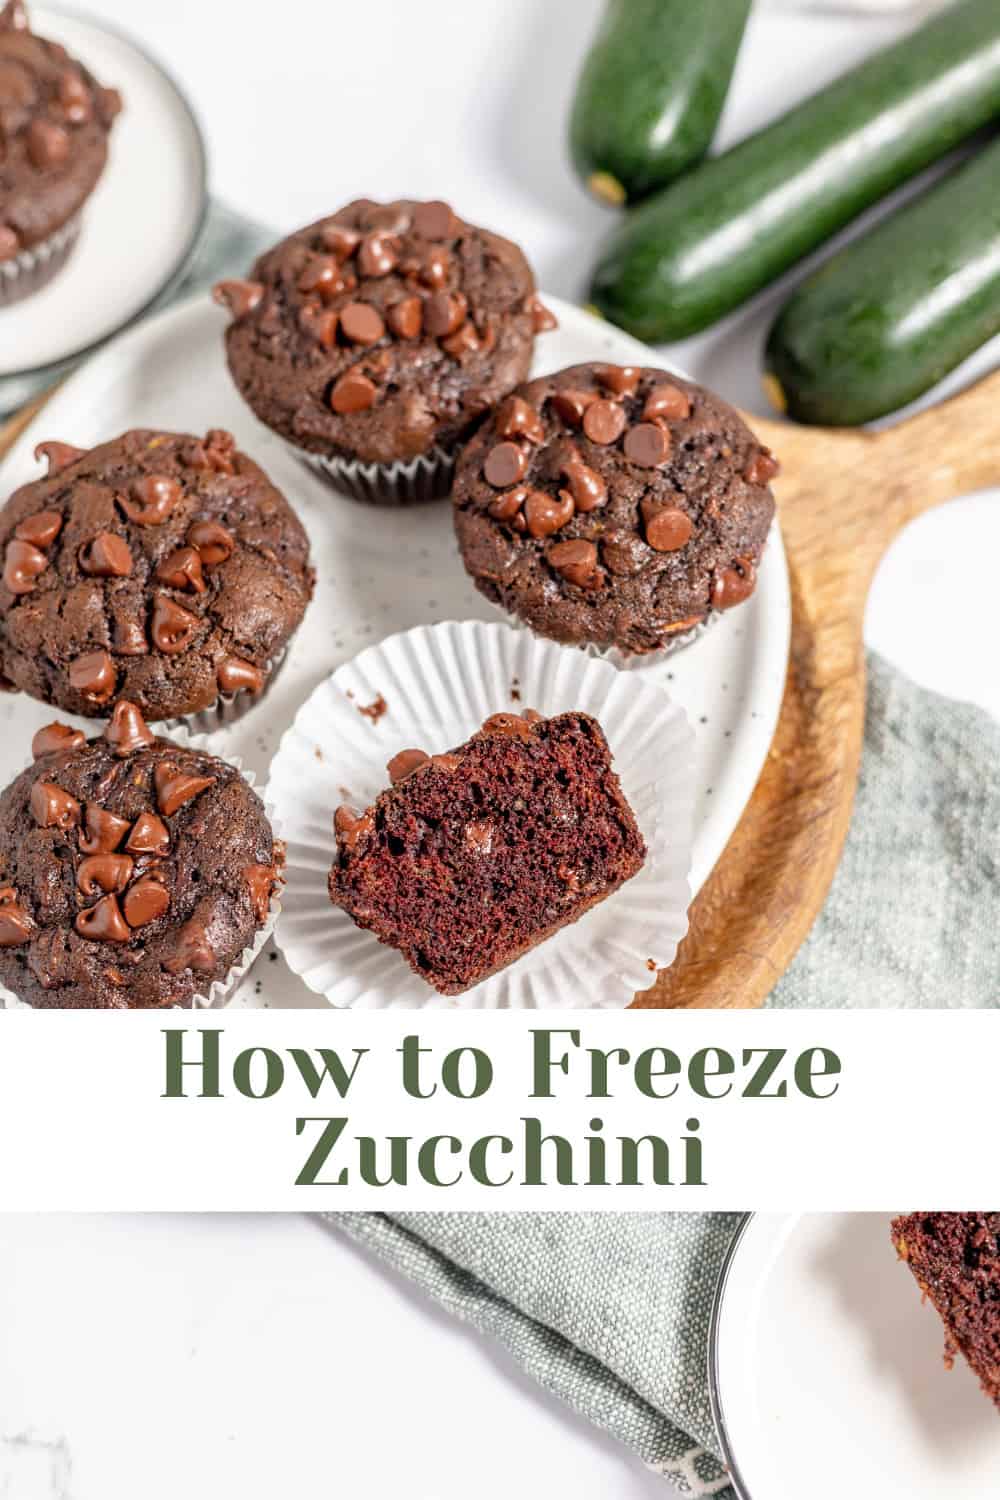 Step-by-step guide on freezing zucchini muffins.